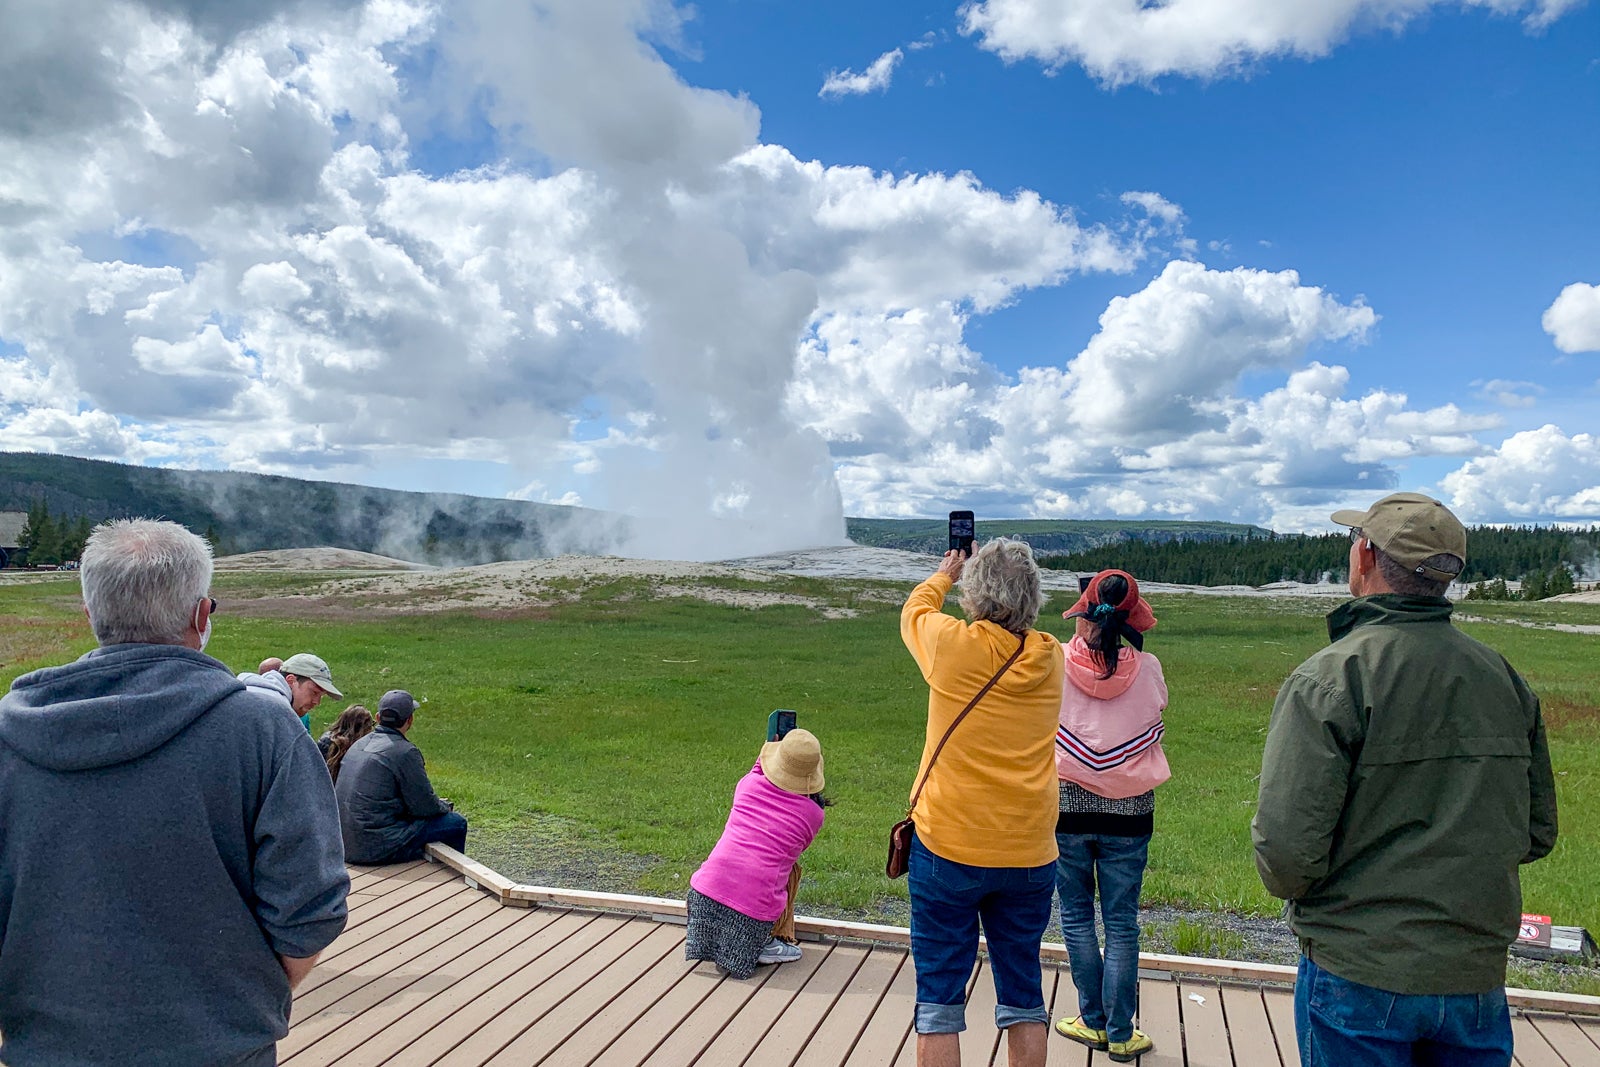  Yellowstone to reopen as of July 2 — with some exceptions